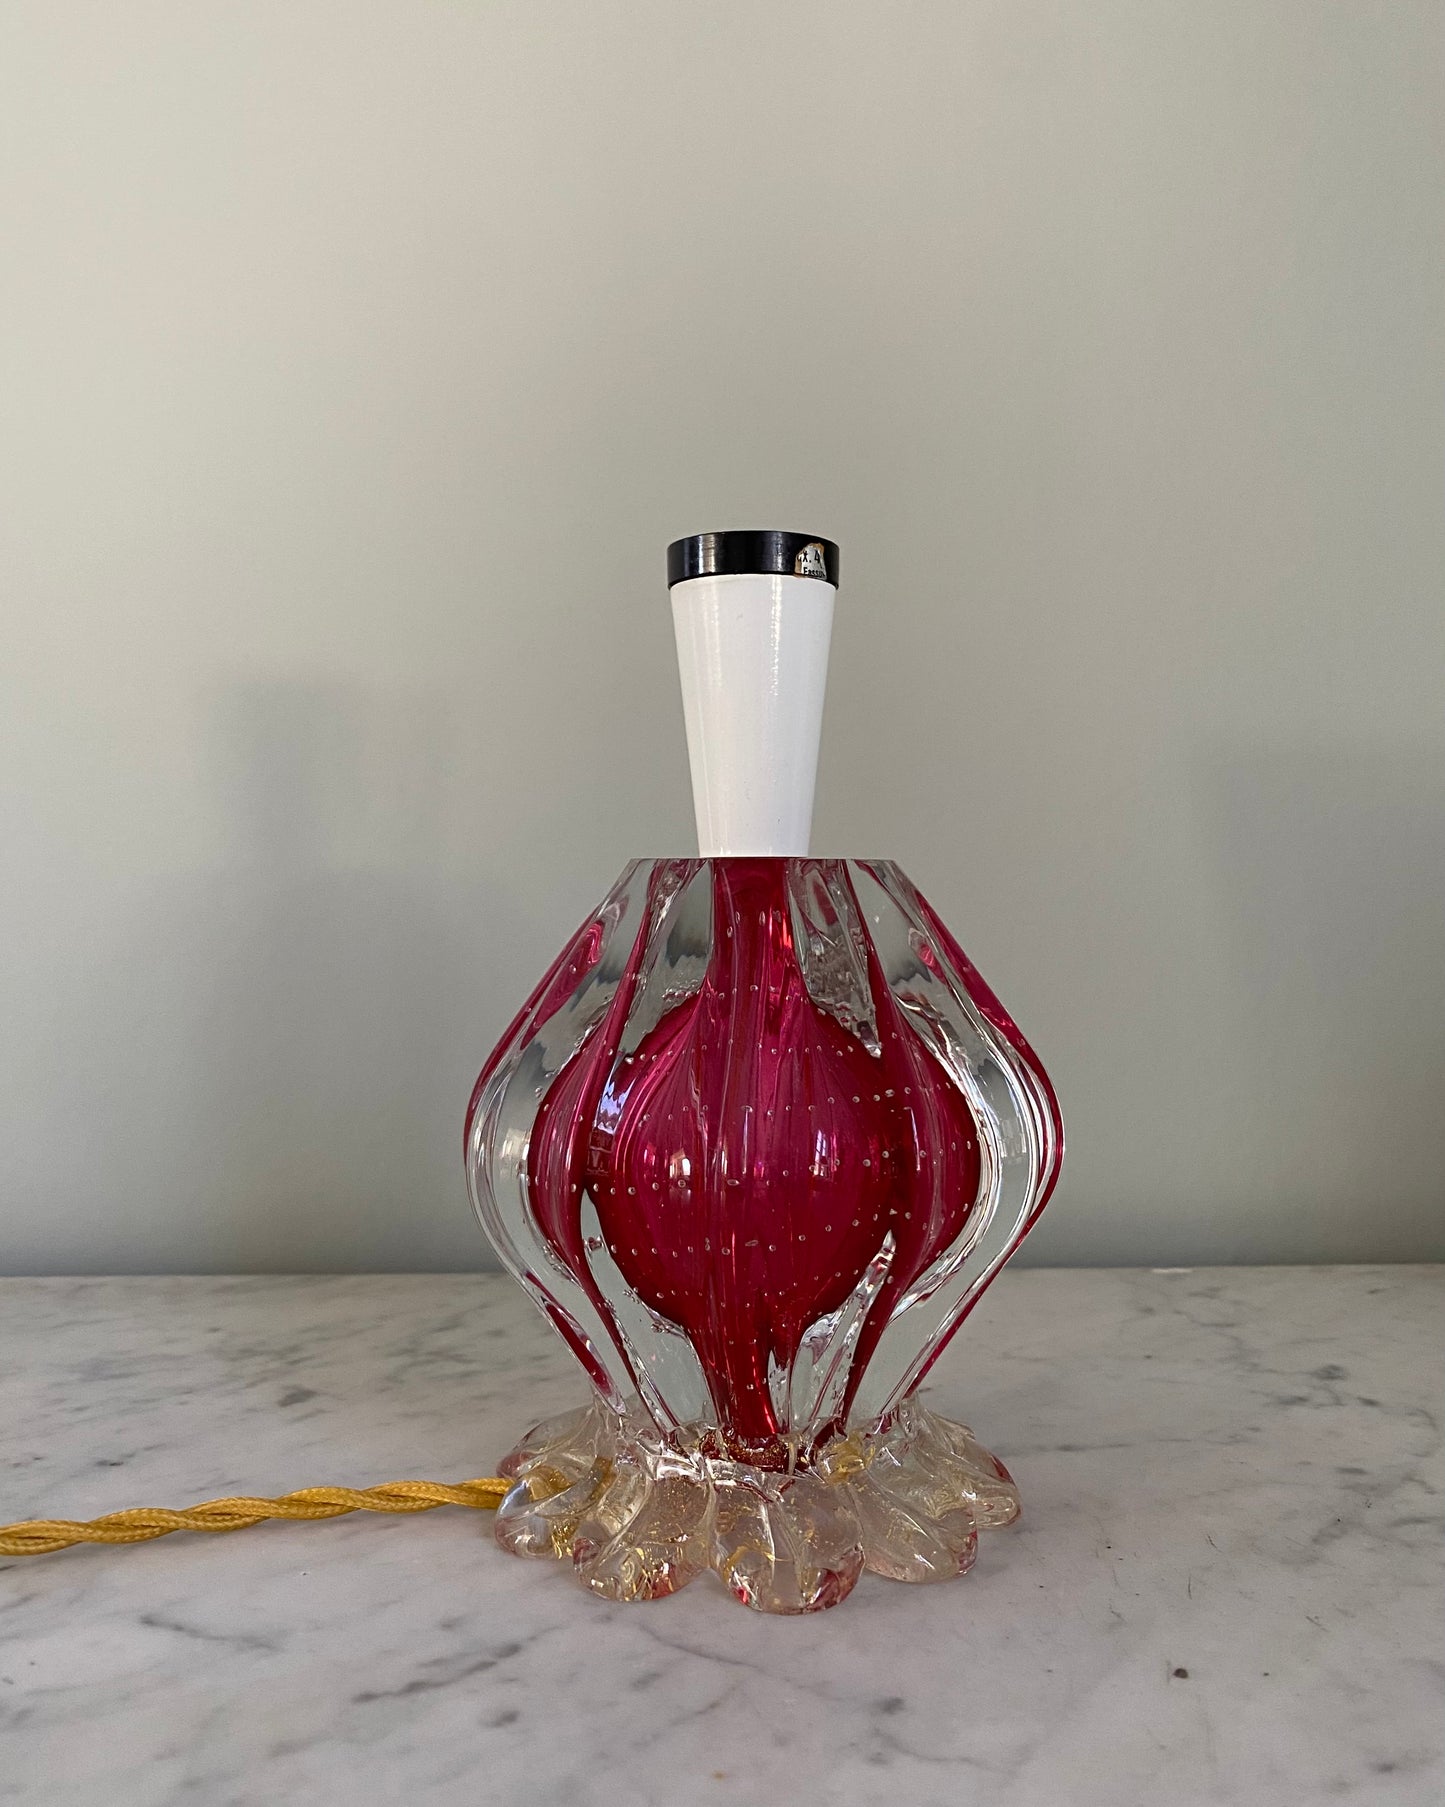 Murano Glass Lamp from Barovier & Toso with customized shade